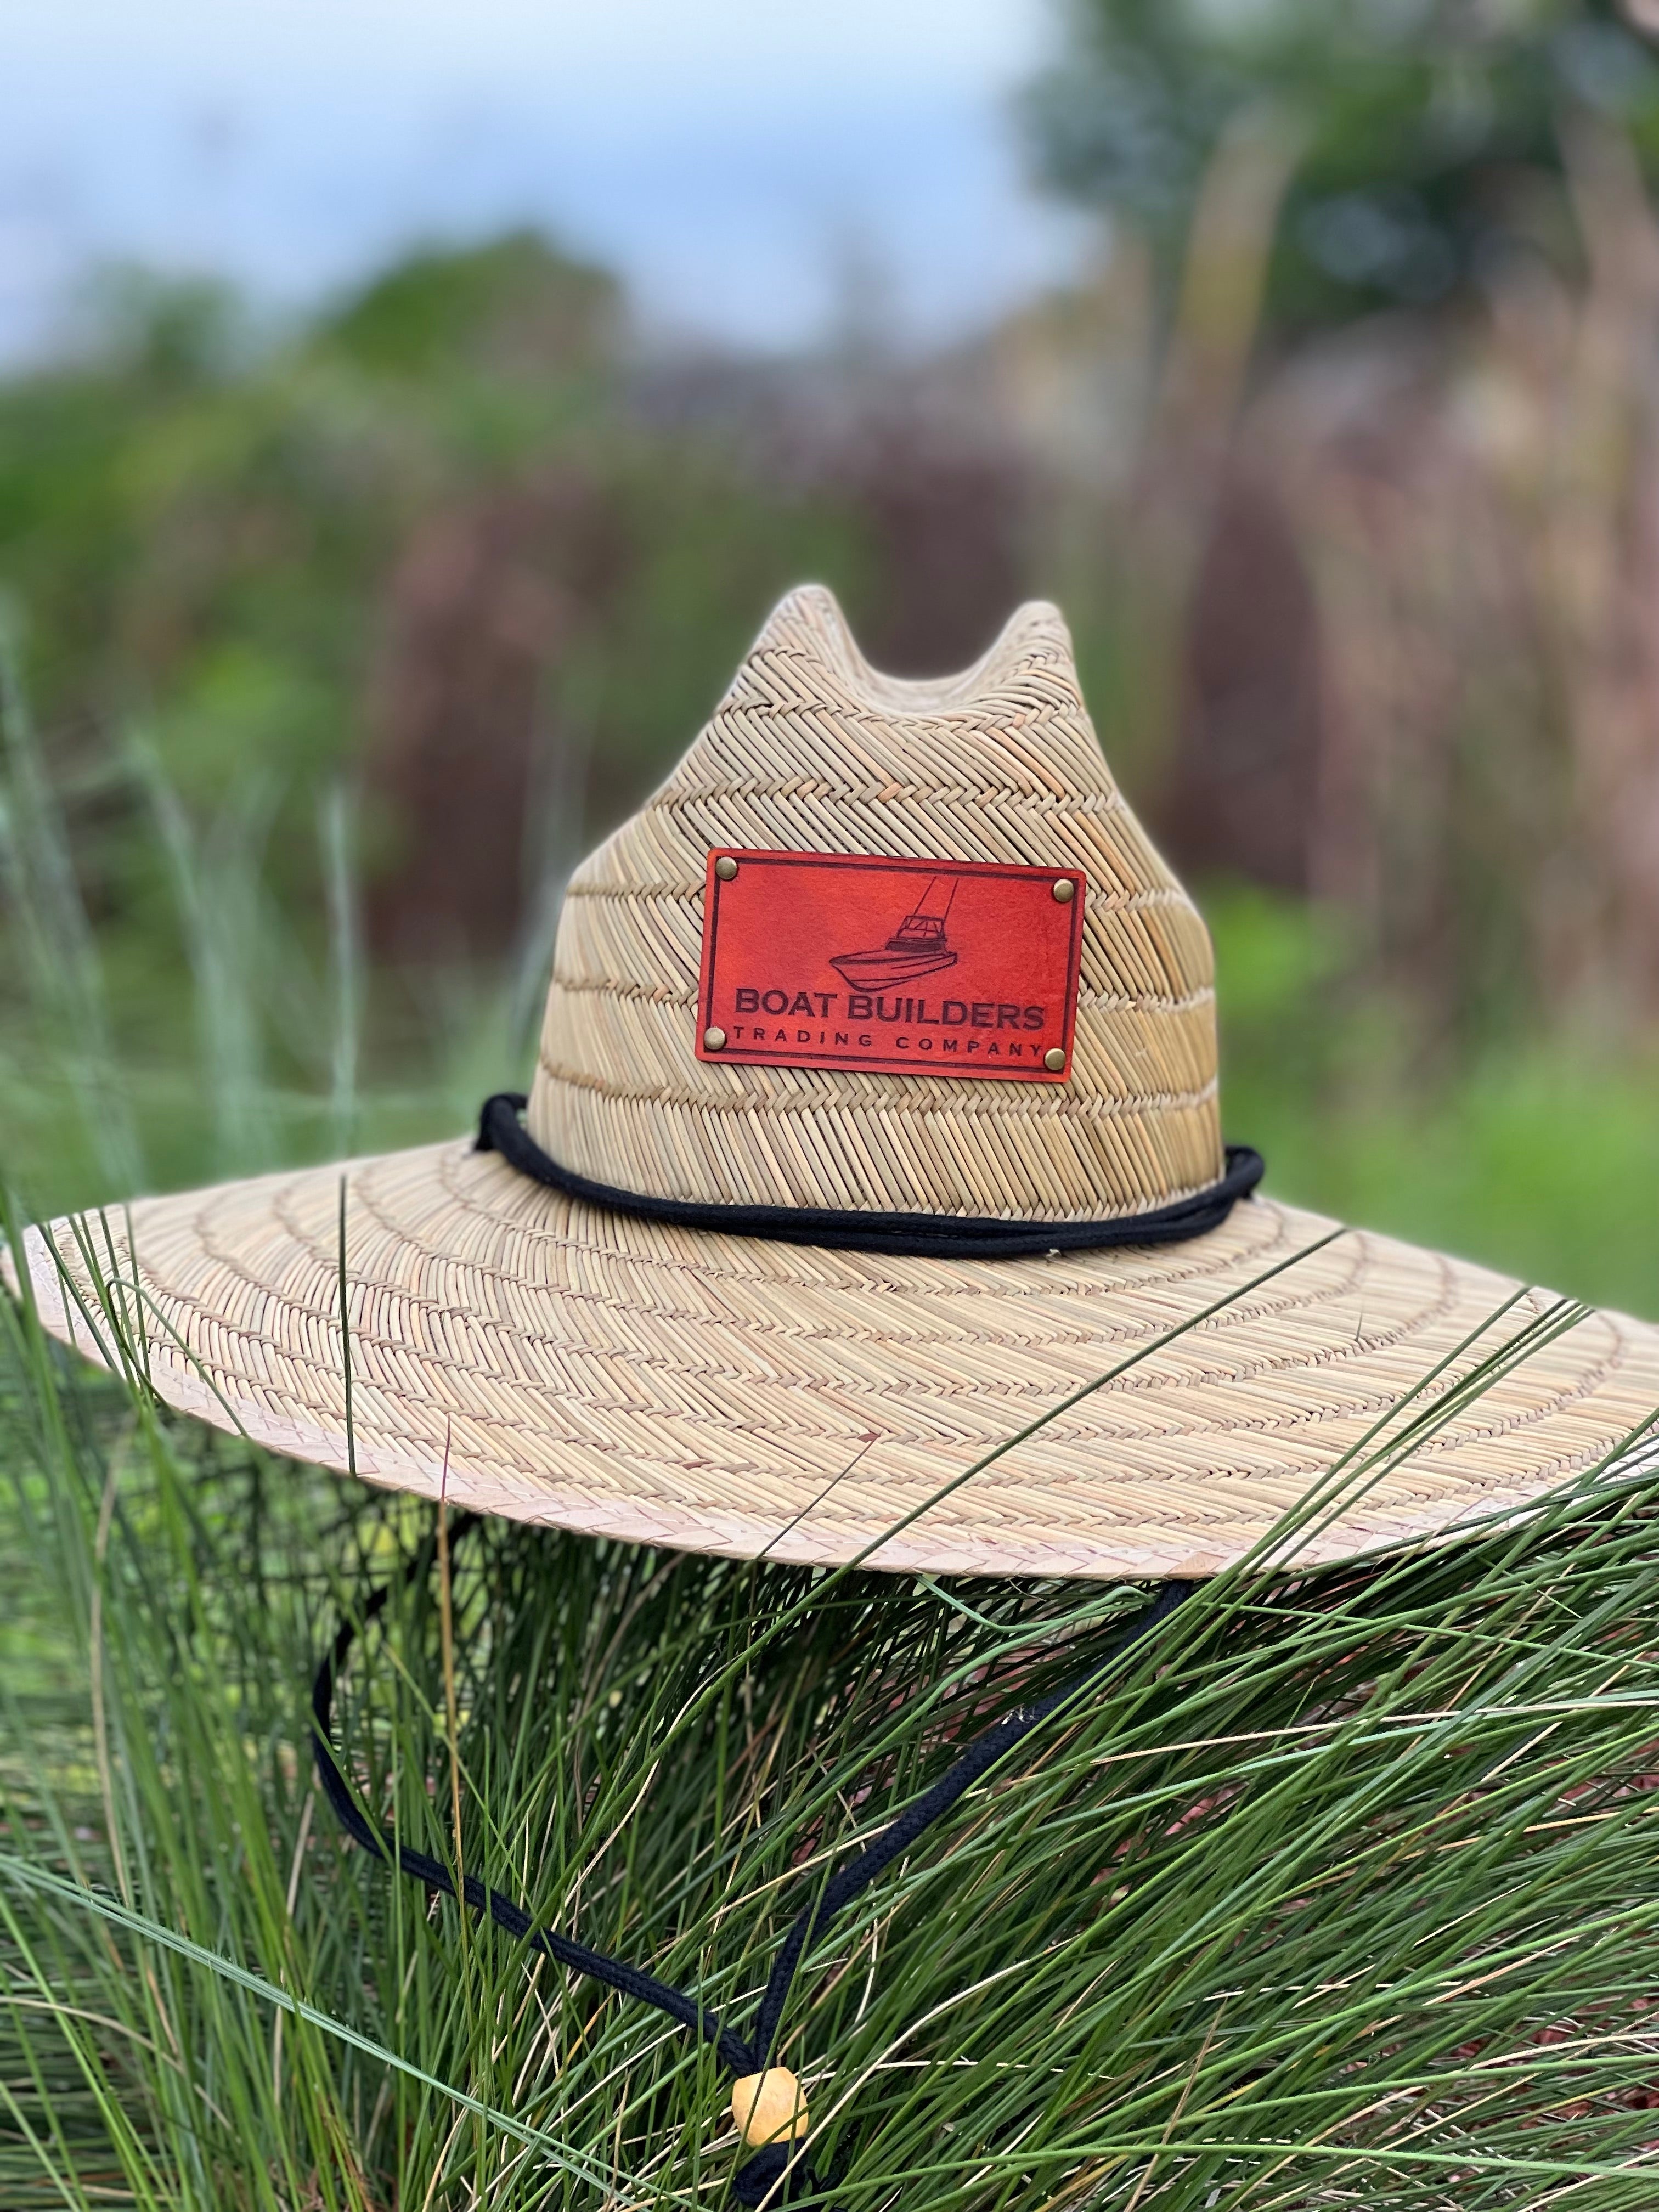 Boat Builders Trading Co - Limited Edition Straw Hat Boat Logo